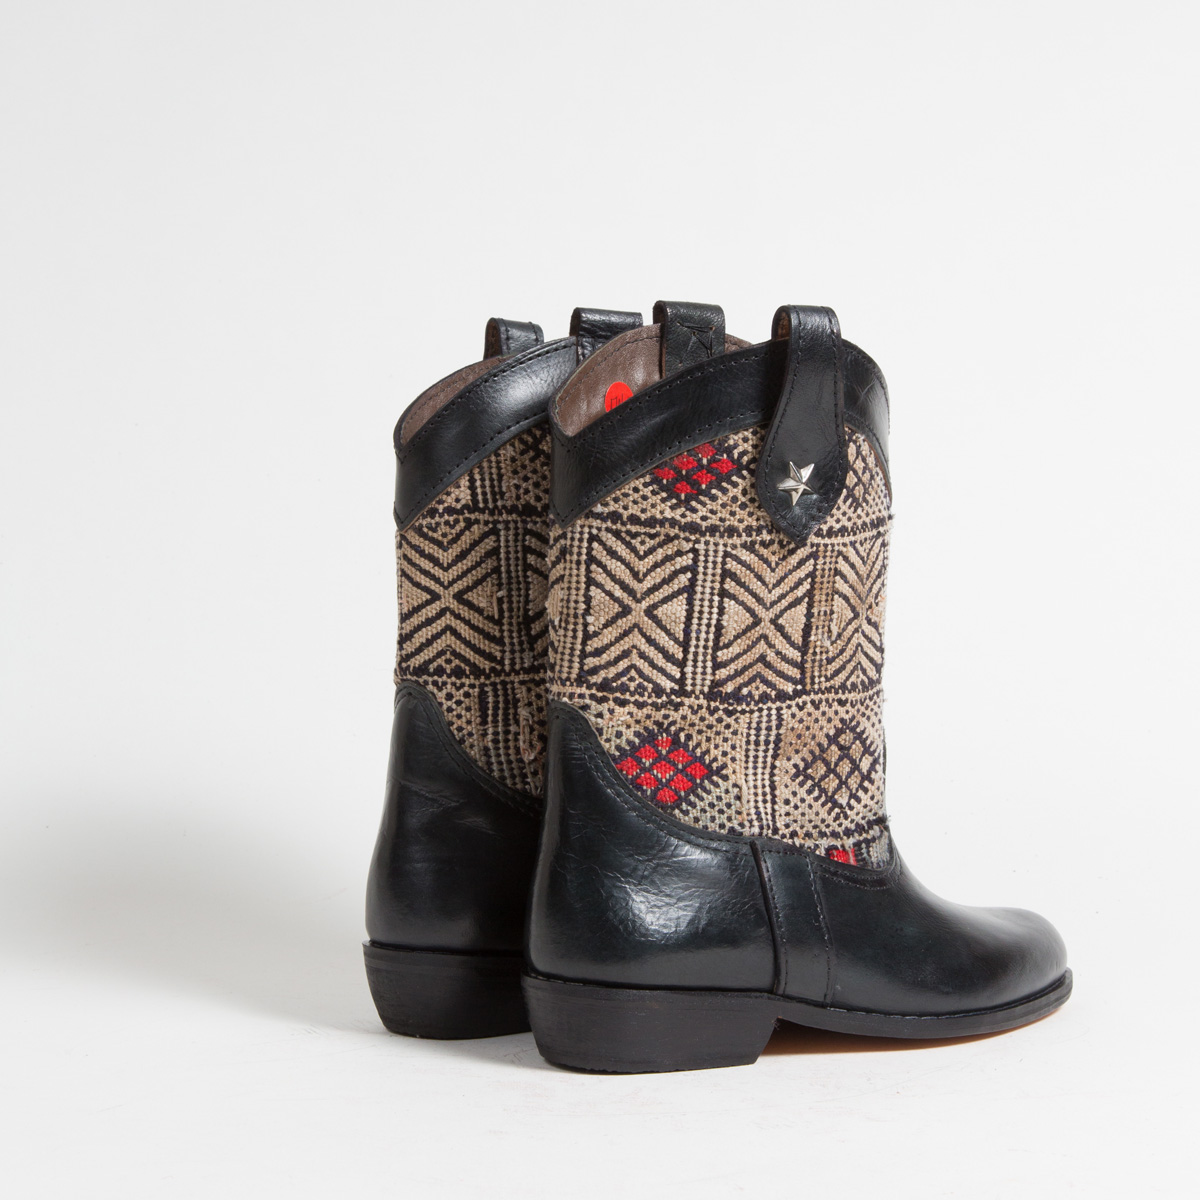 Bottines Kilim cuir mababouche artisanales (Réf. MN1-36)